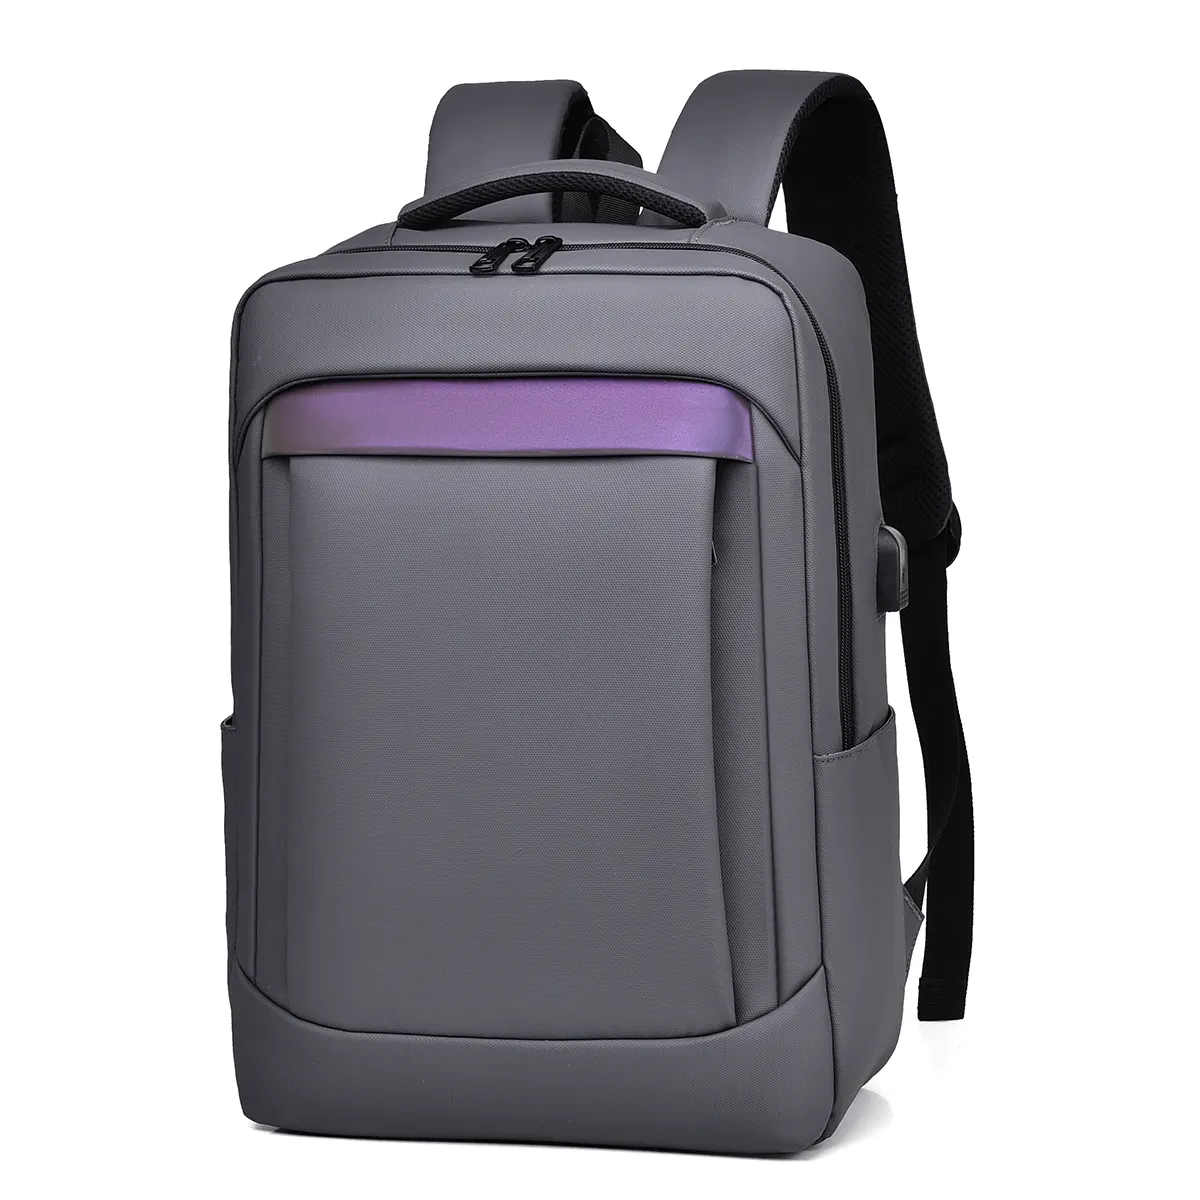 USB Charging Port Waterproof Bag Backpack Laptop Backpack Wholesale Cheap Traveling Business Black Polyester Fashion Unisex